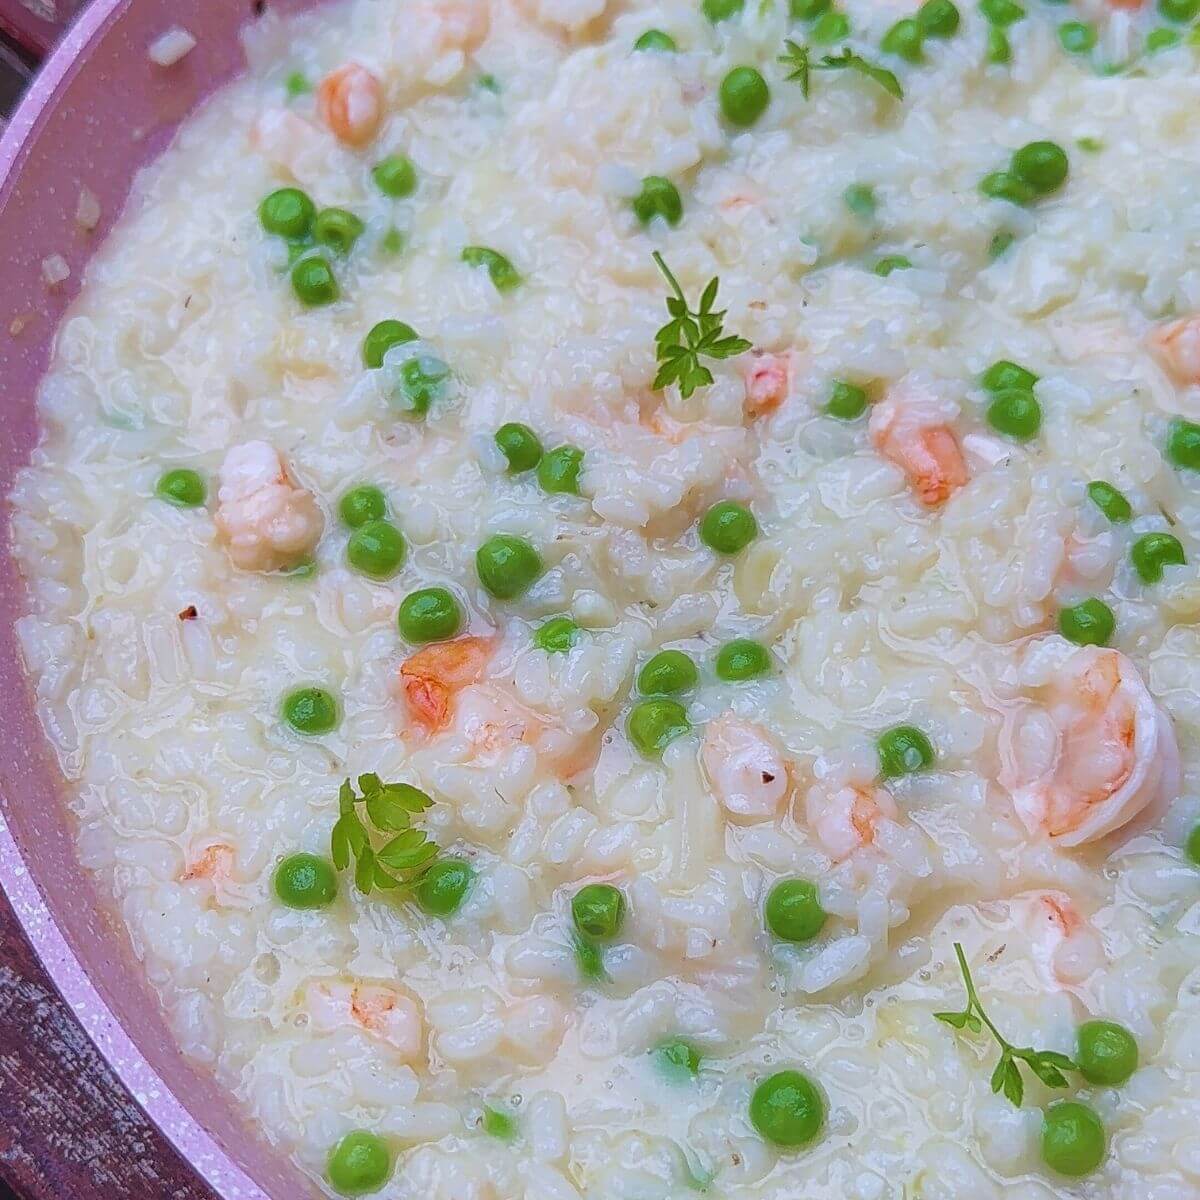 Delicious Prawn and Pea Risotto presented in a pan, with plump prawns and vibrant green peas, garnished with parsley leaves.